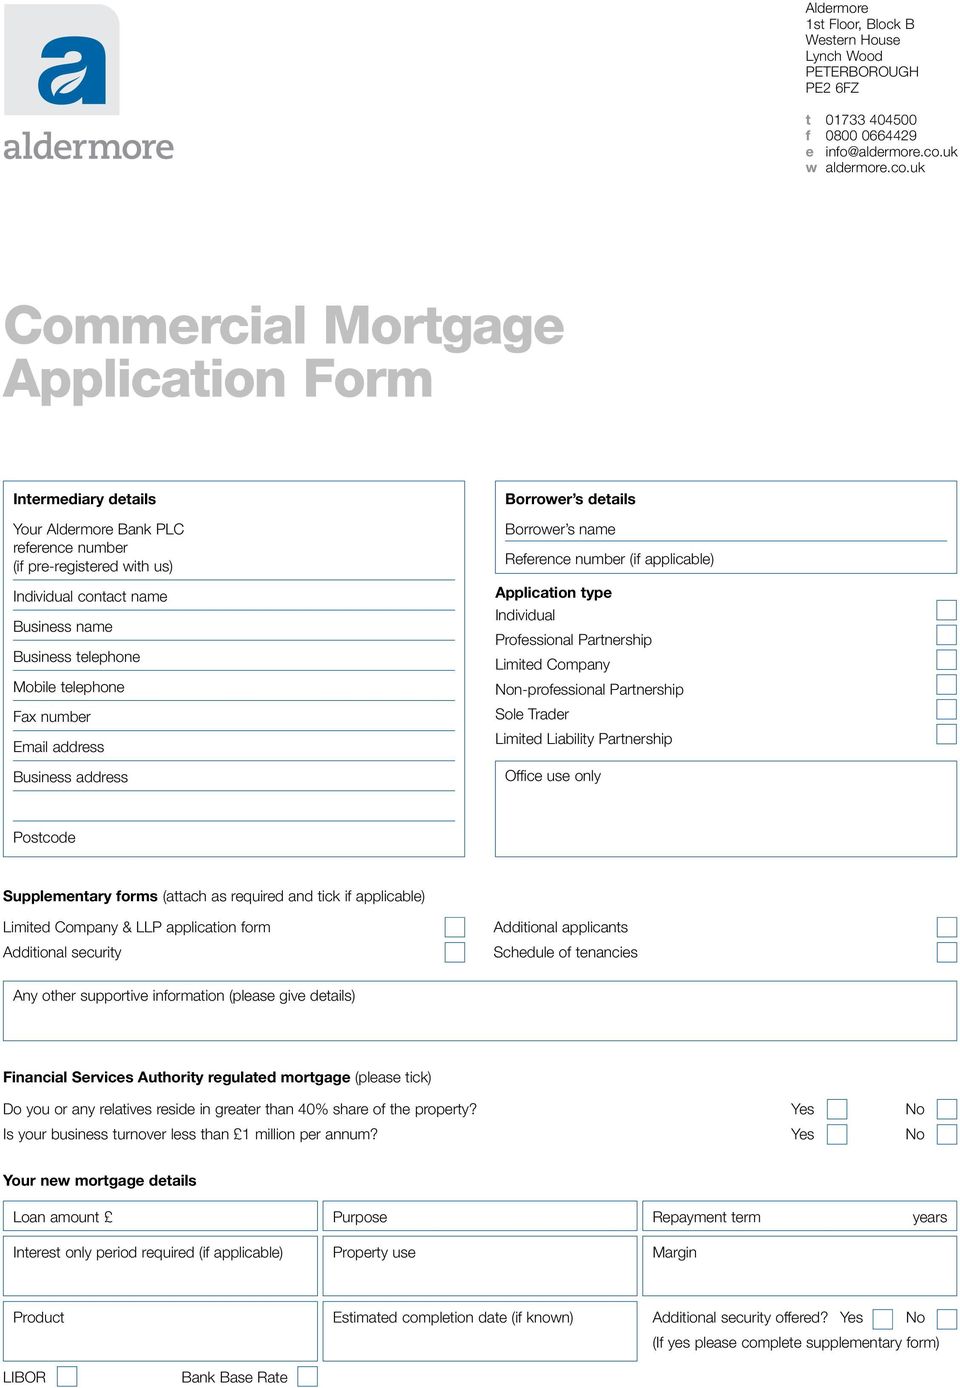 uk Commercial Mortgage Application Form Intermediary details Your Aldermore Bank PLC reference number (if pre-registered with us) Individual contact name Business name Business telephone Mobile